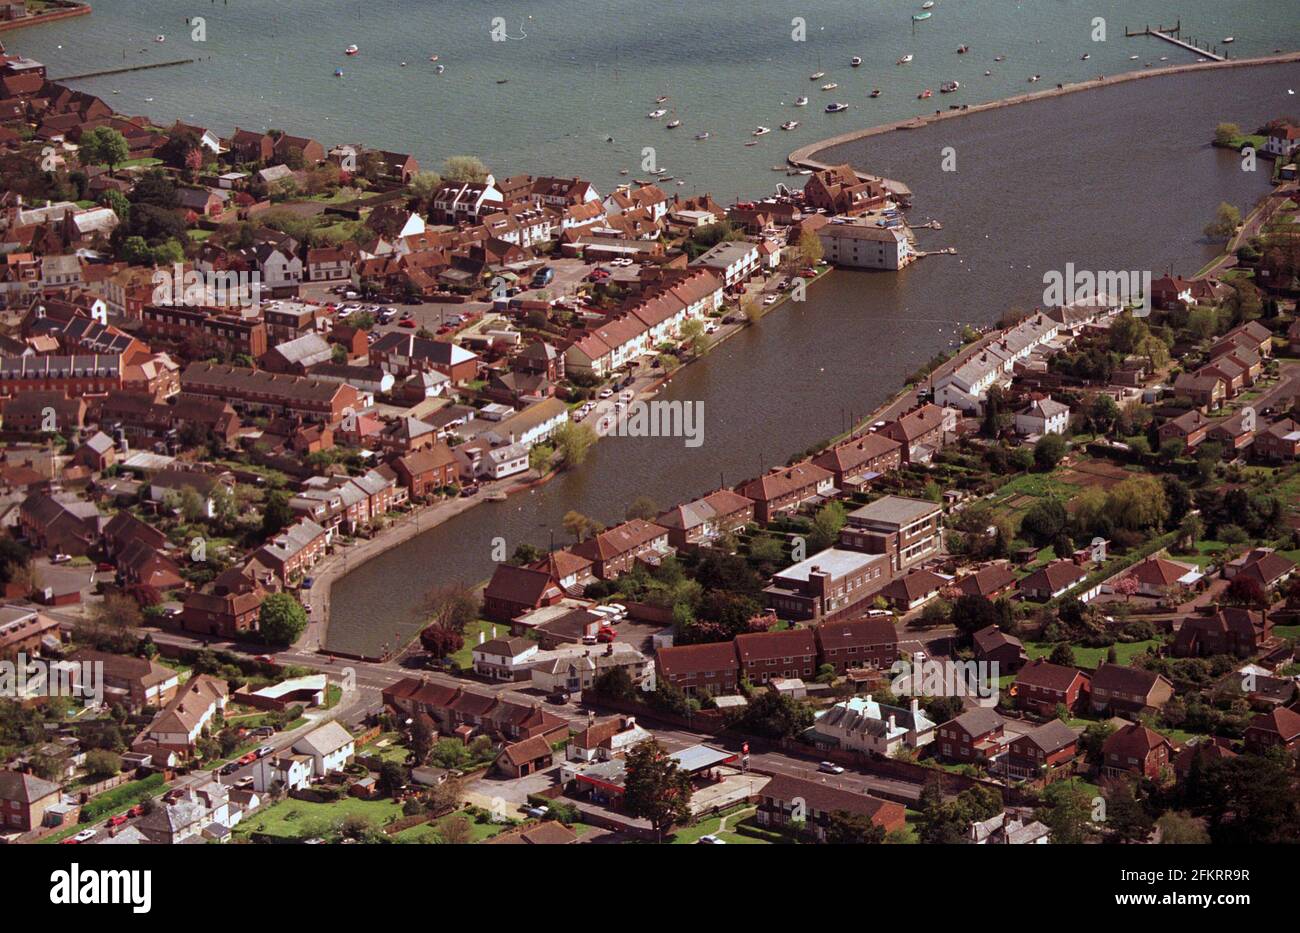 EMSWORTH, VICINO A PORTSMOUTH PIC MIKE WALKER, 1998 Foto Stock